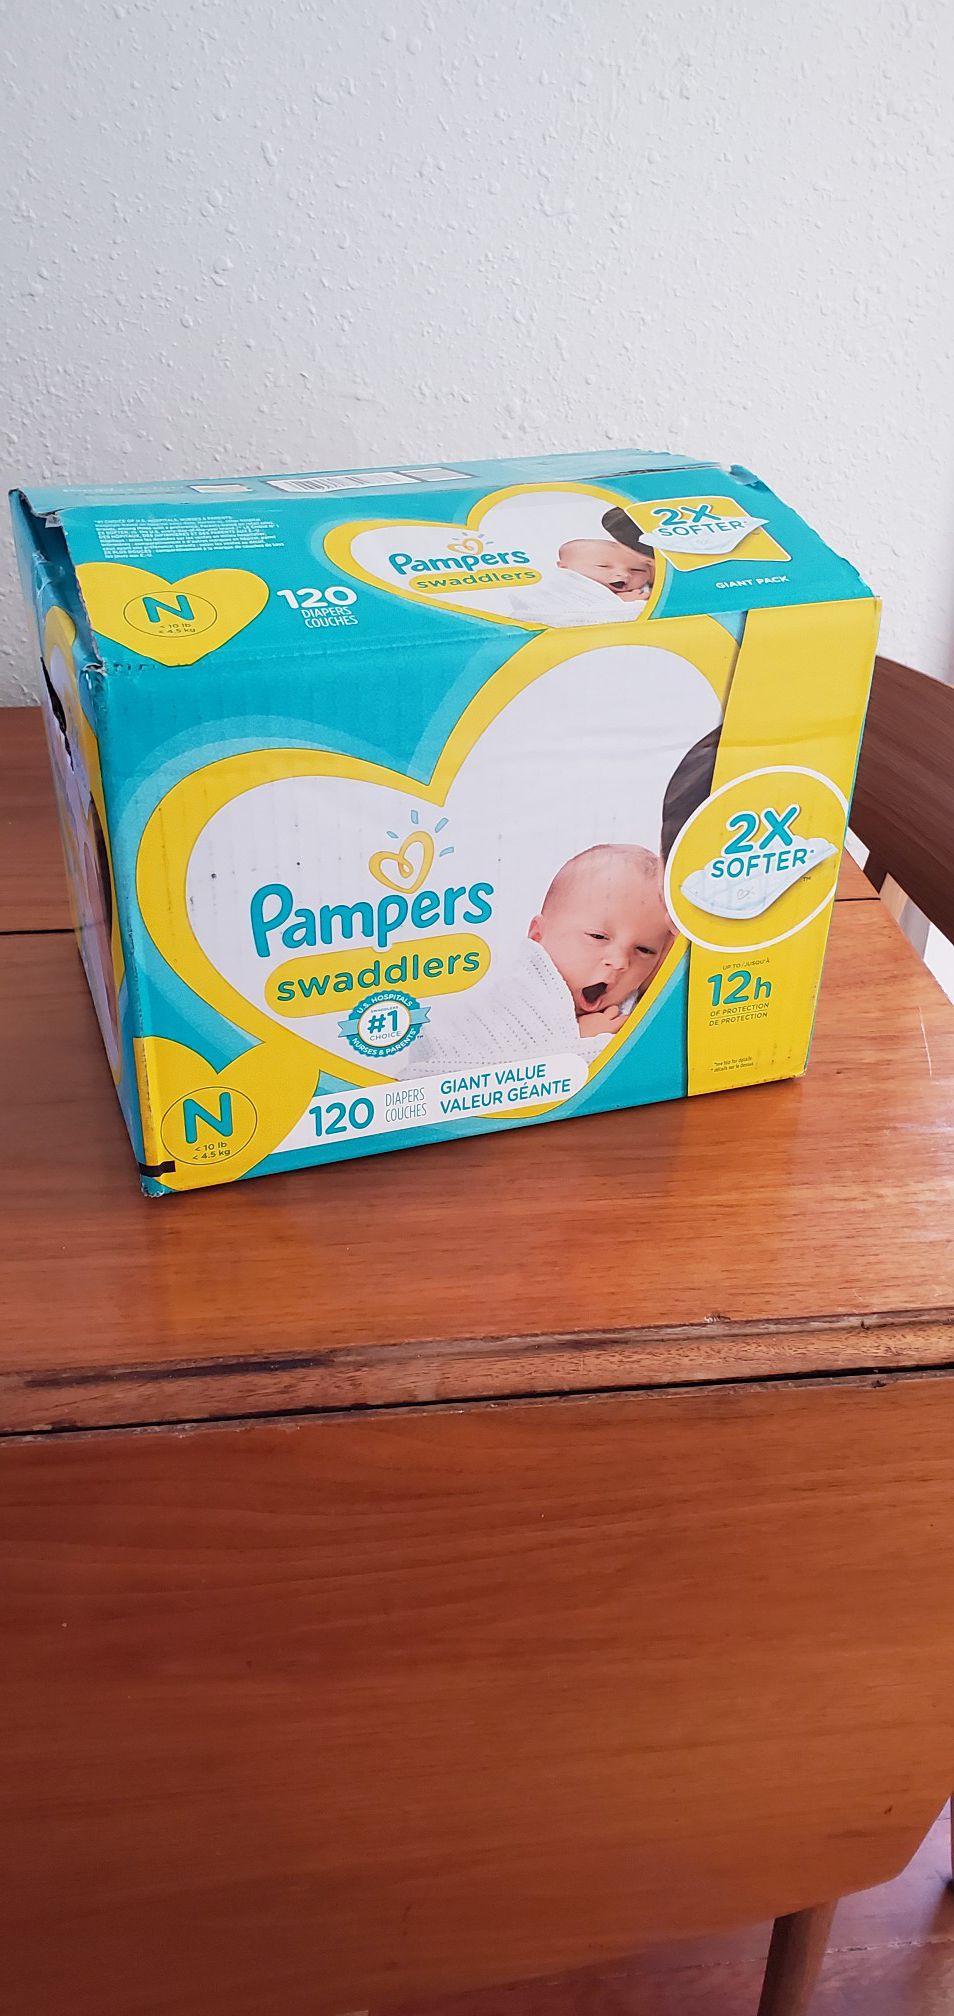 Pampers Swaddlers Newborn Diapers Size N 120 count